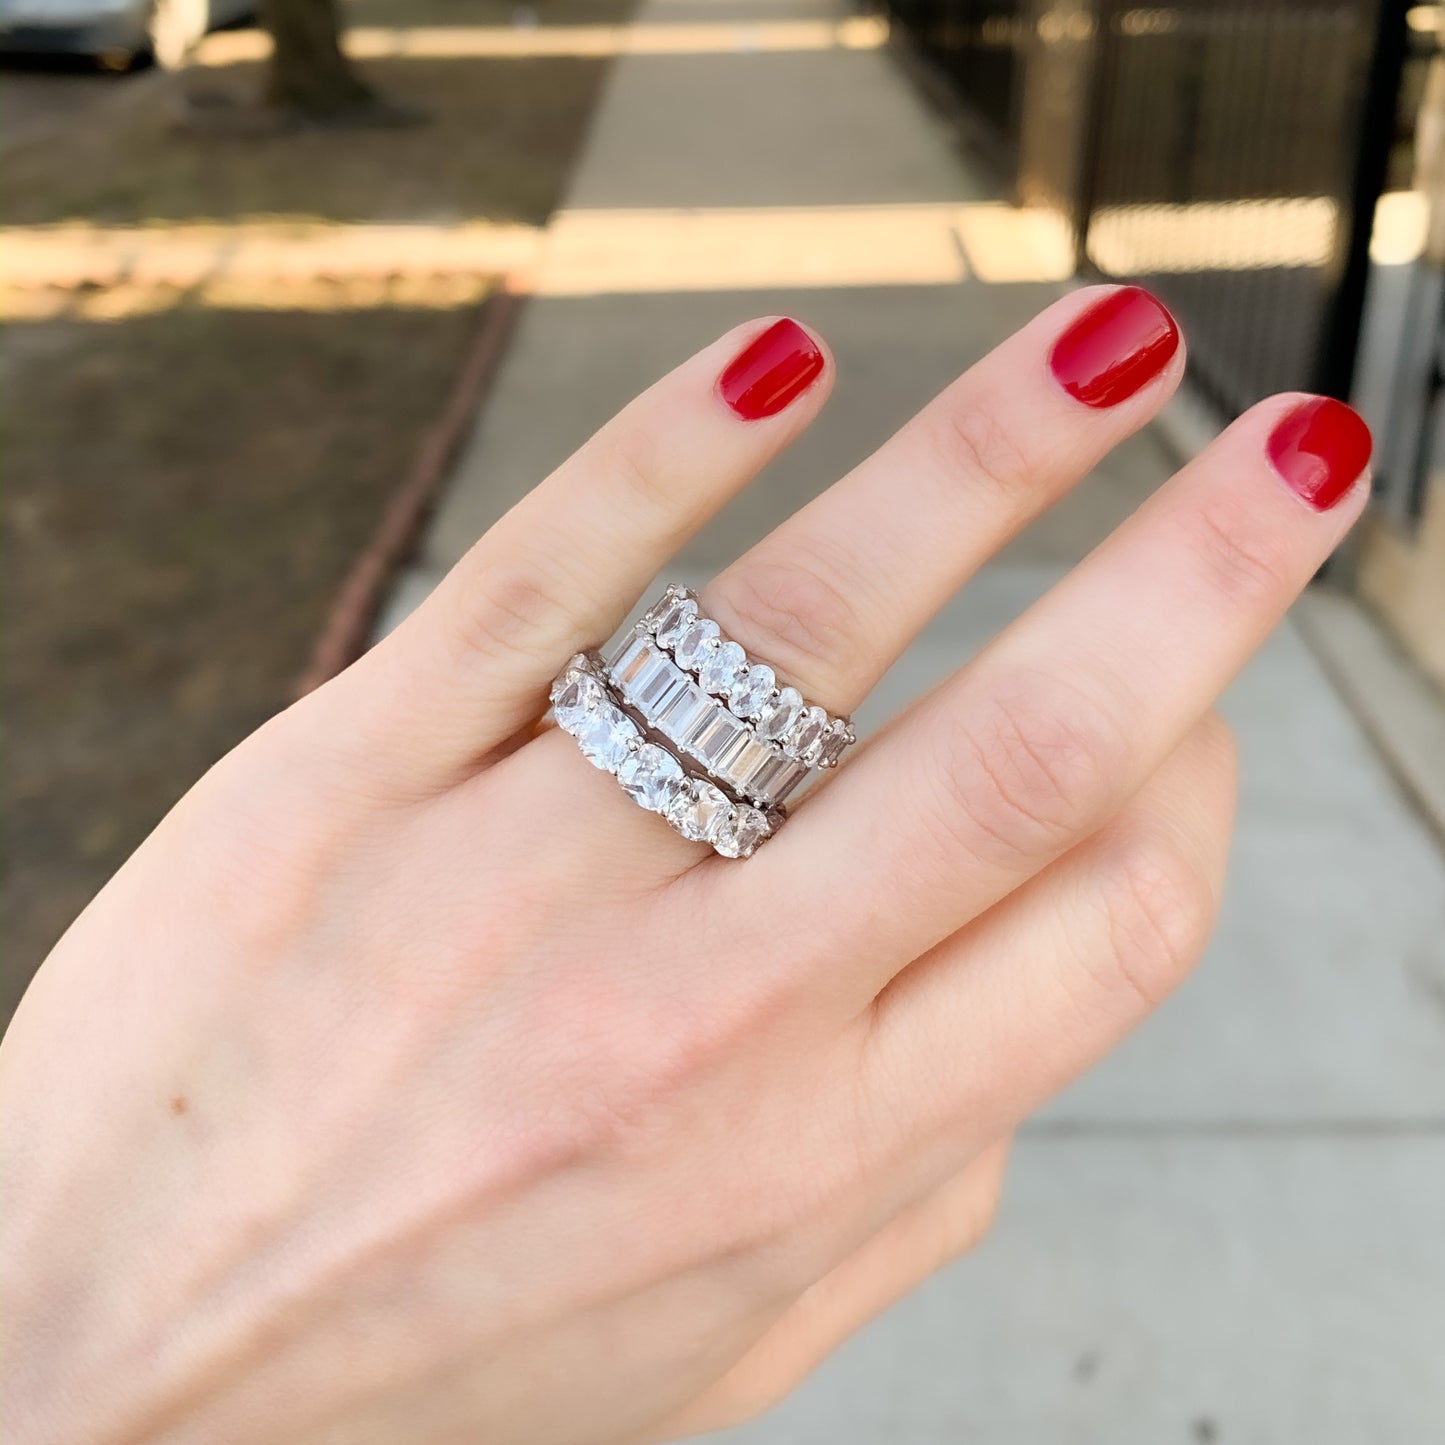 Alexandra Marks stacking her Oval, Emerald and Cushion Cut CZ Eternity bands